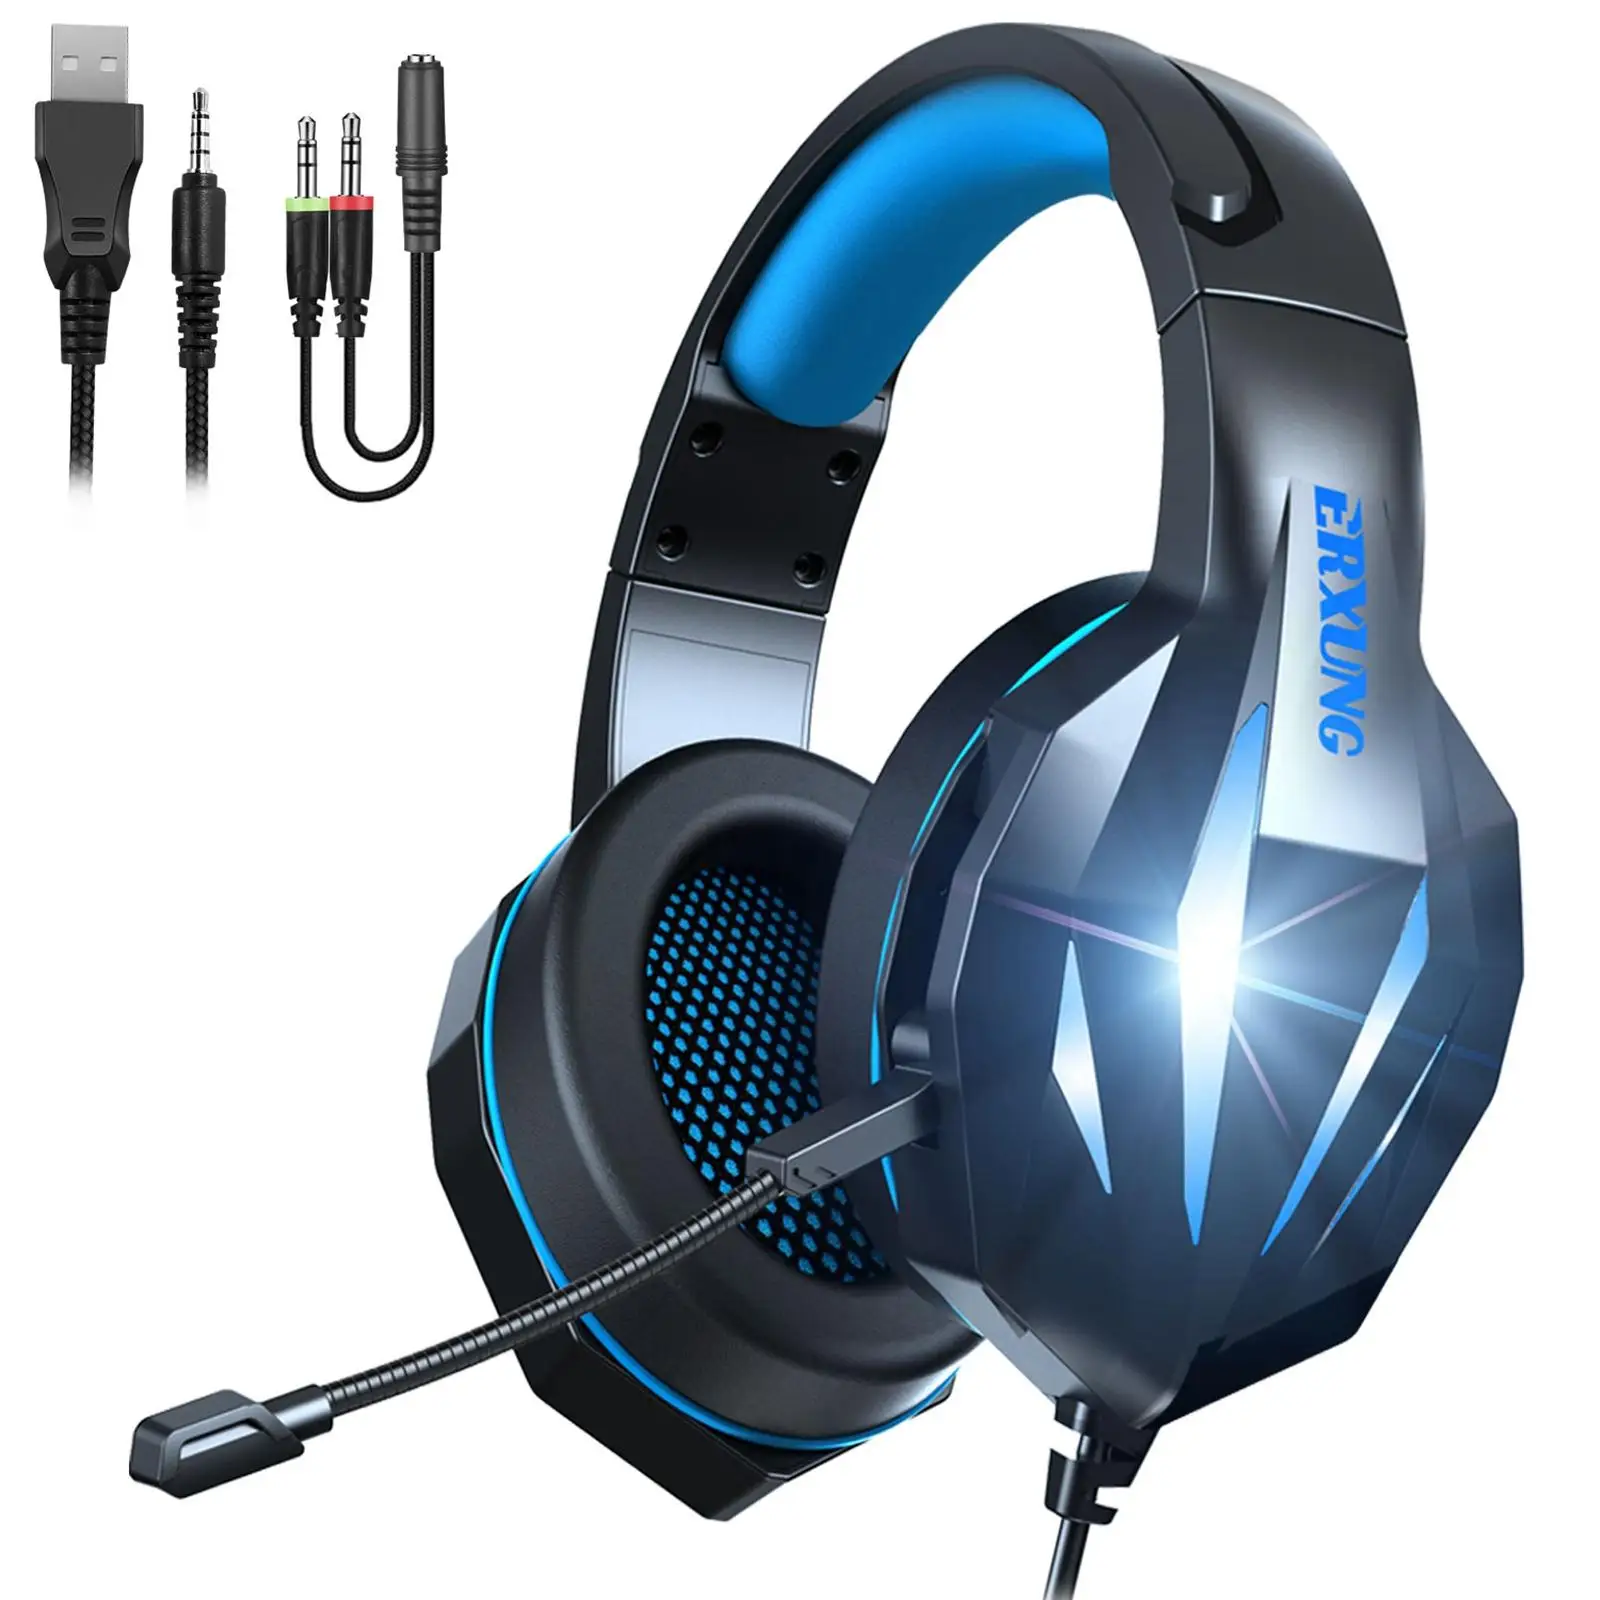 Stereo LED Over-Ear Gaming Headset Headphones 4 Surround 3.5mm Plug 4 5 Controller PC Laptop Computer Games Gamer Mobile Phone